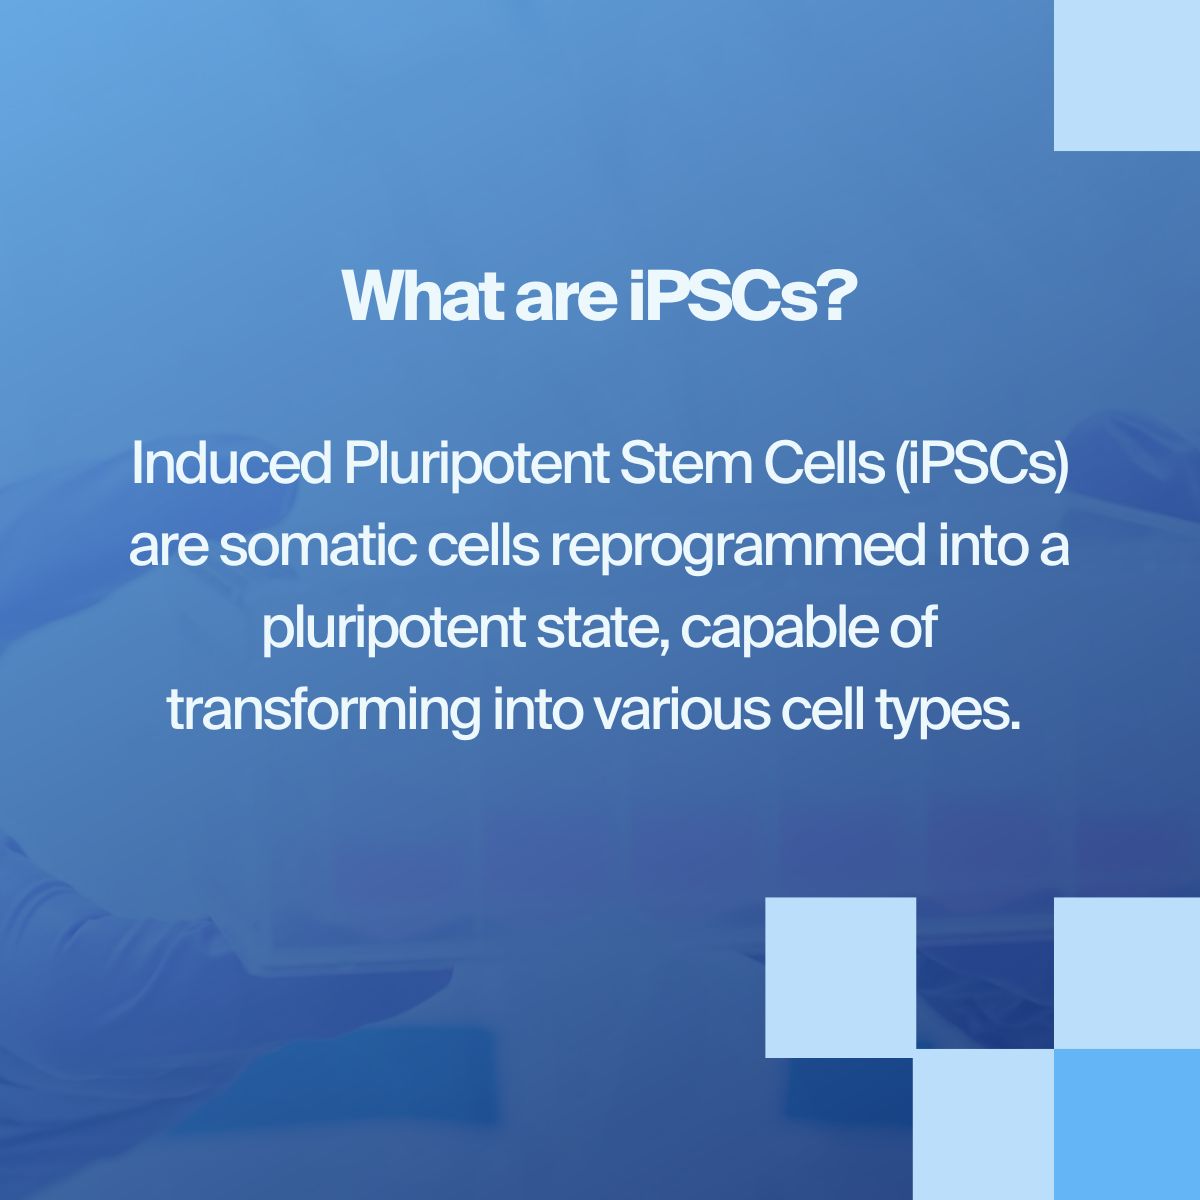 iPSCs, what are they?